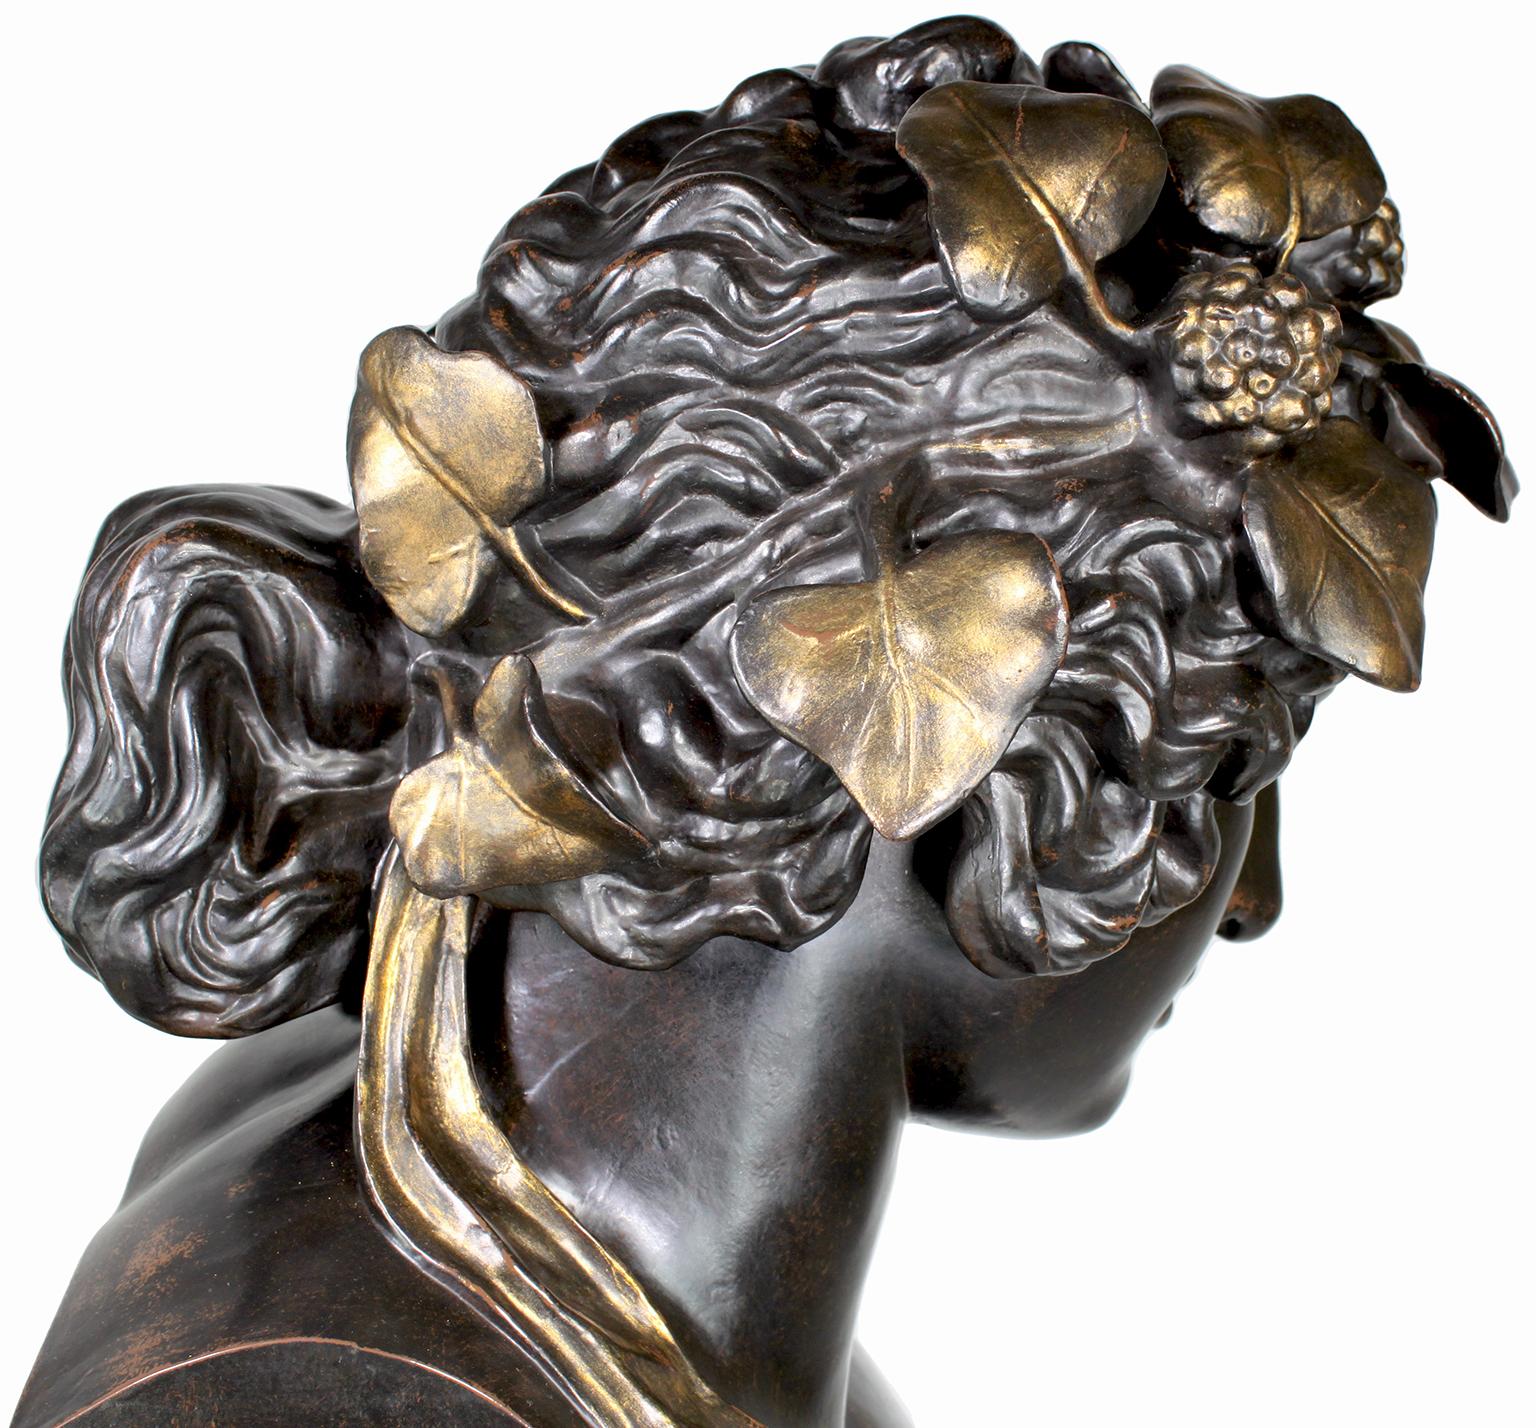 Monumental French 19th Century Cast-Iron Bust of 'Head of Antinous as Dionysus' For Sale 11